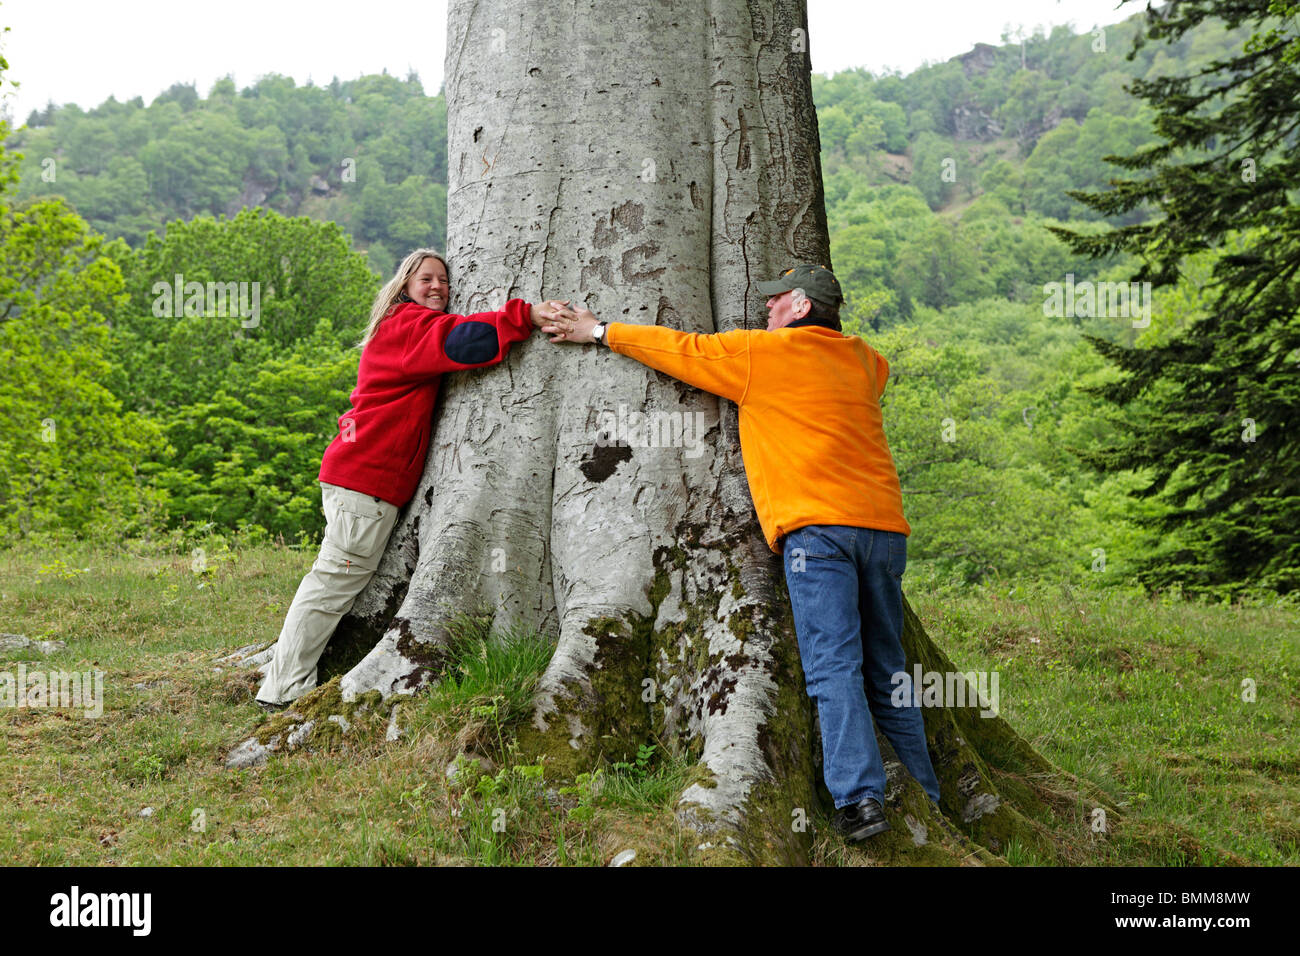 man and woman embracing a large tree trunk Stock Photo